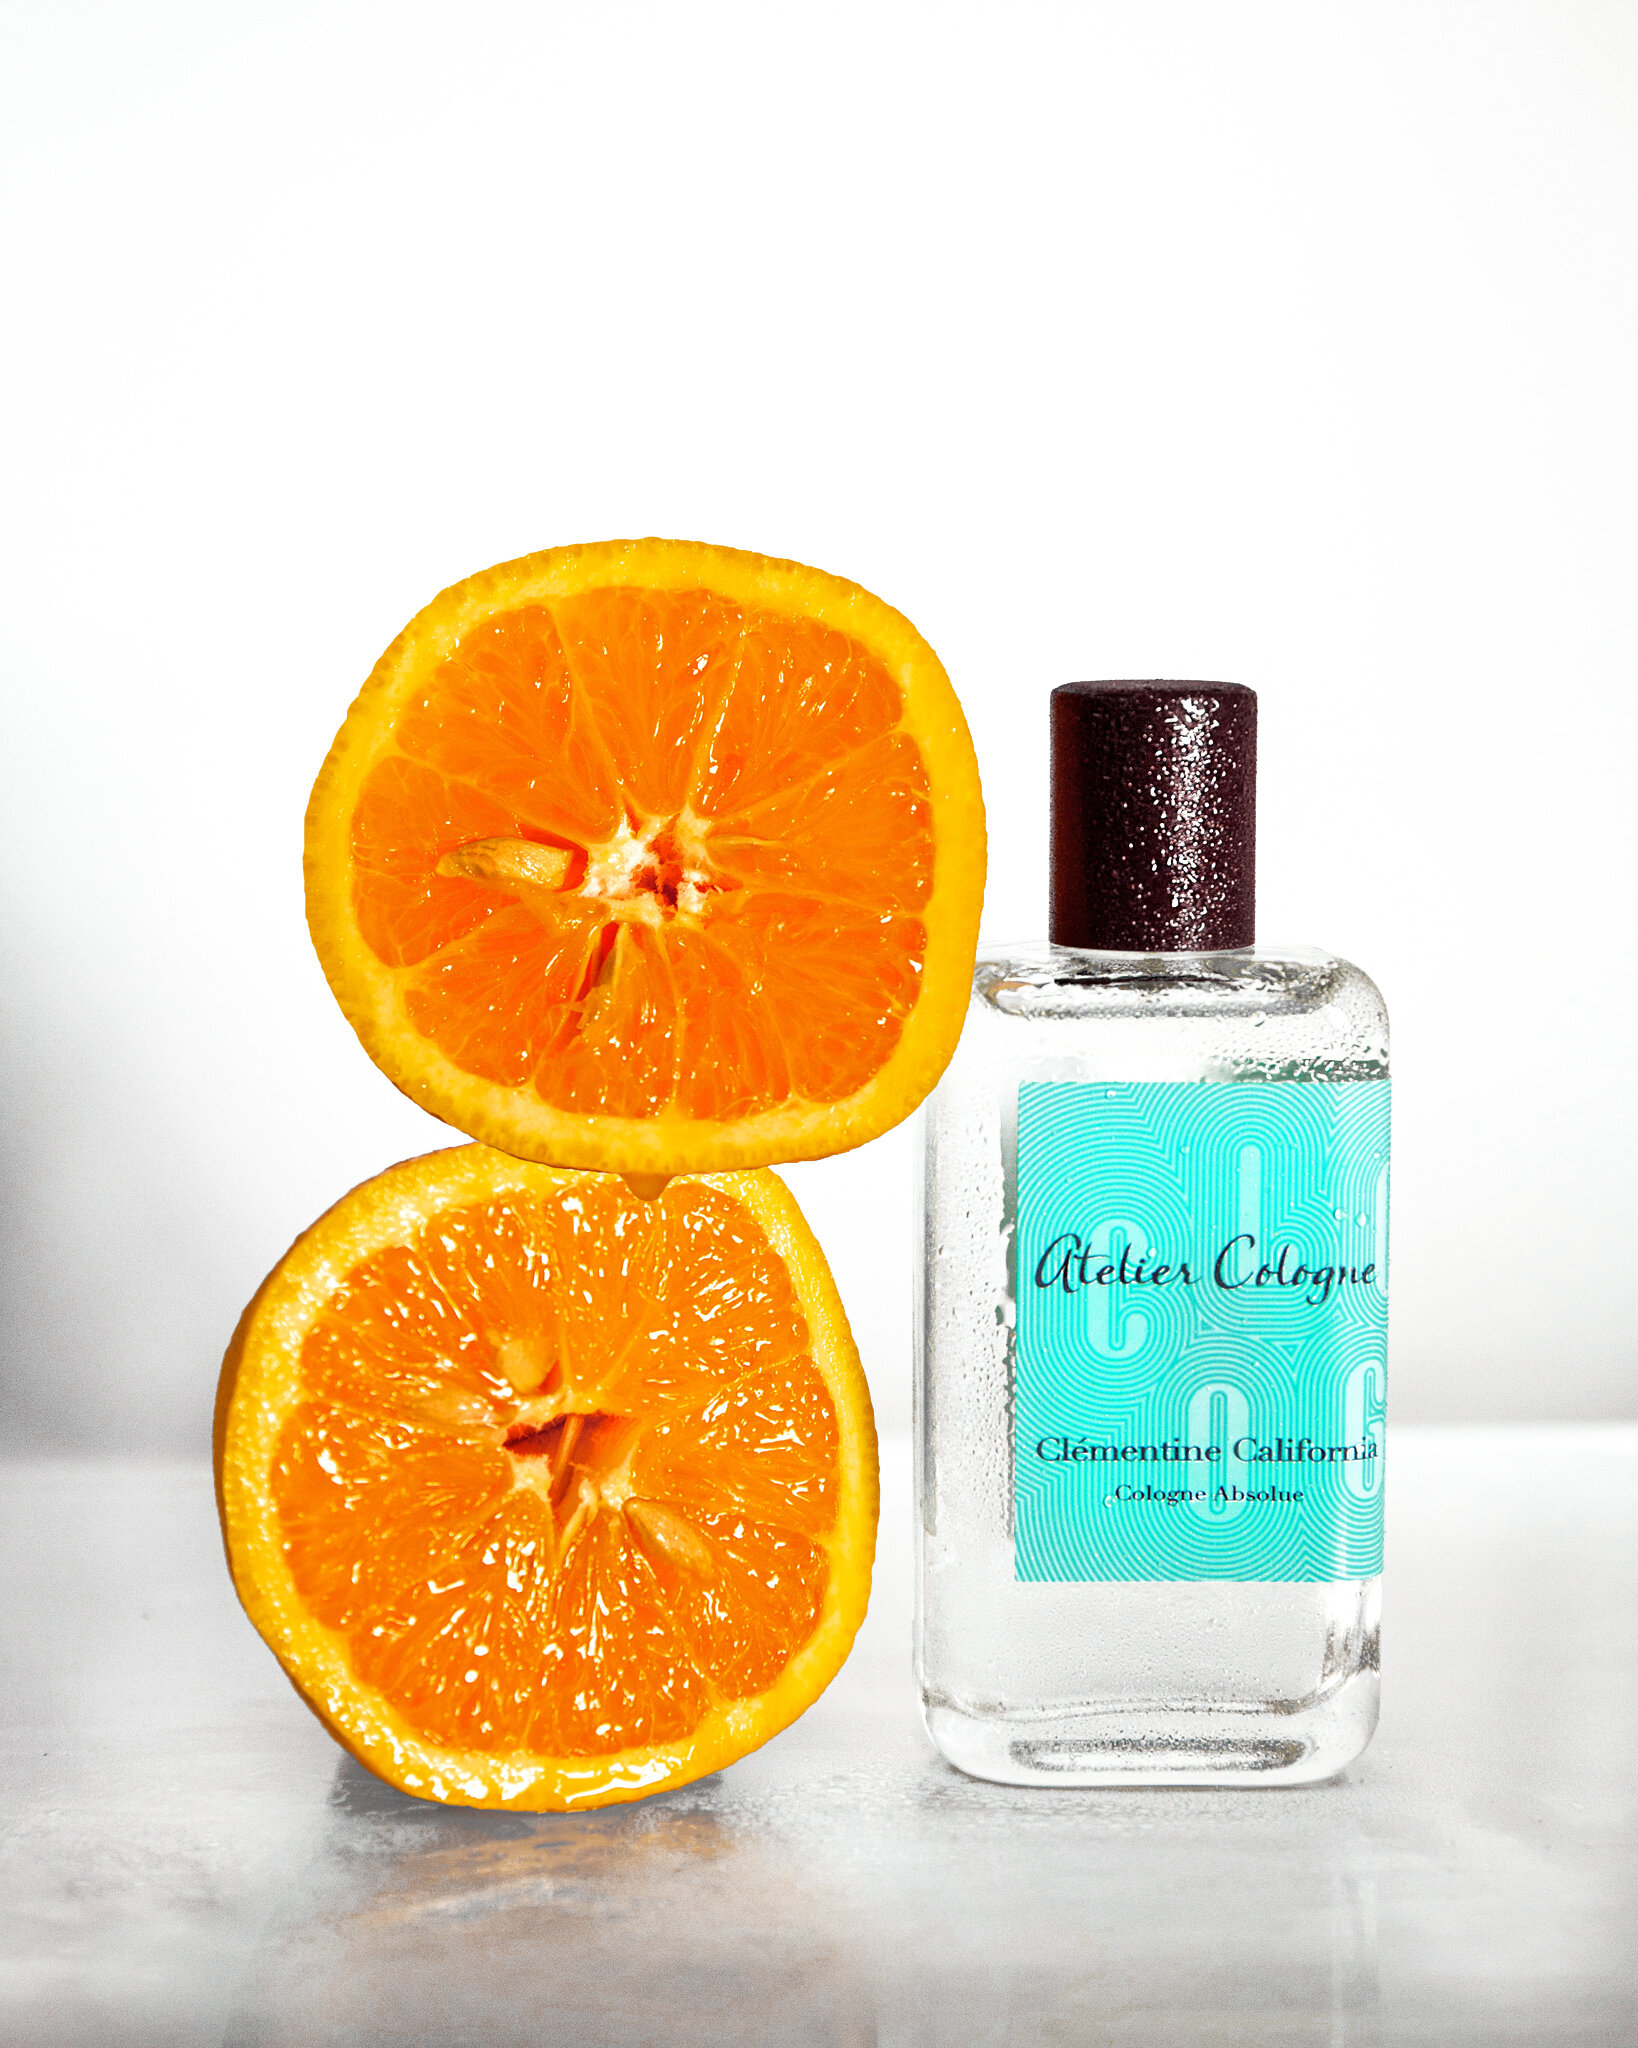 Atelier Cologne Clementine